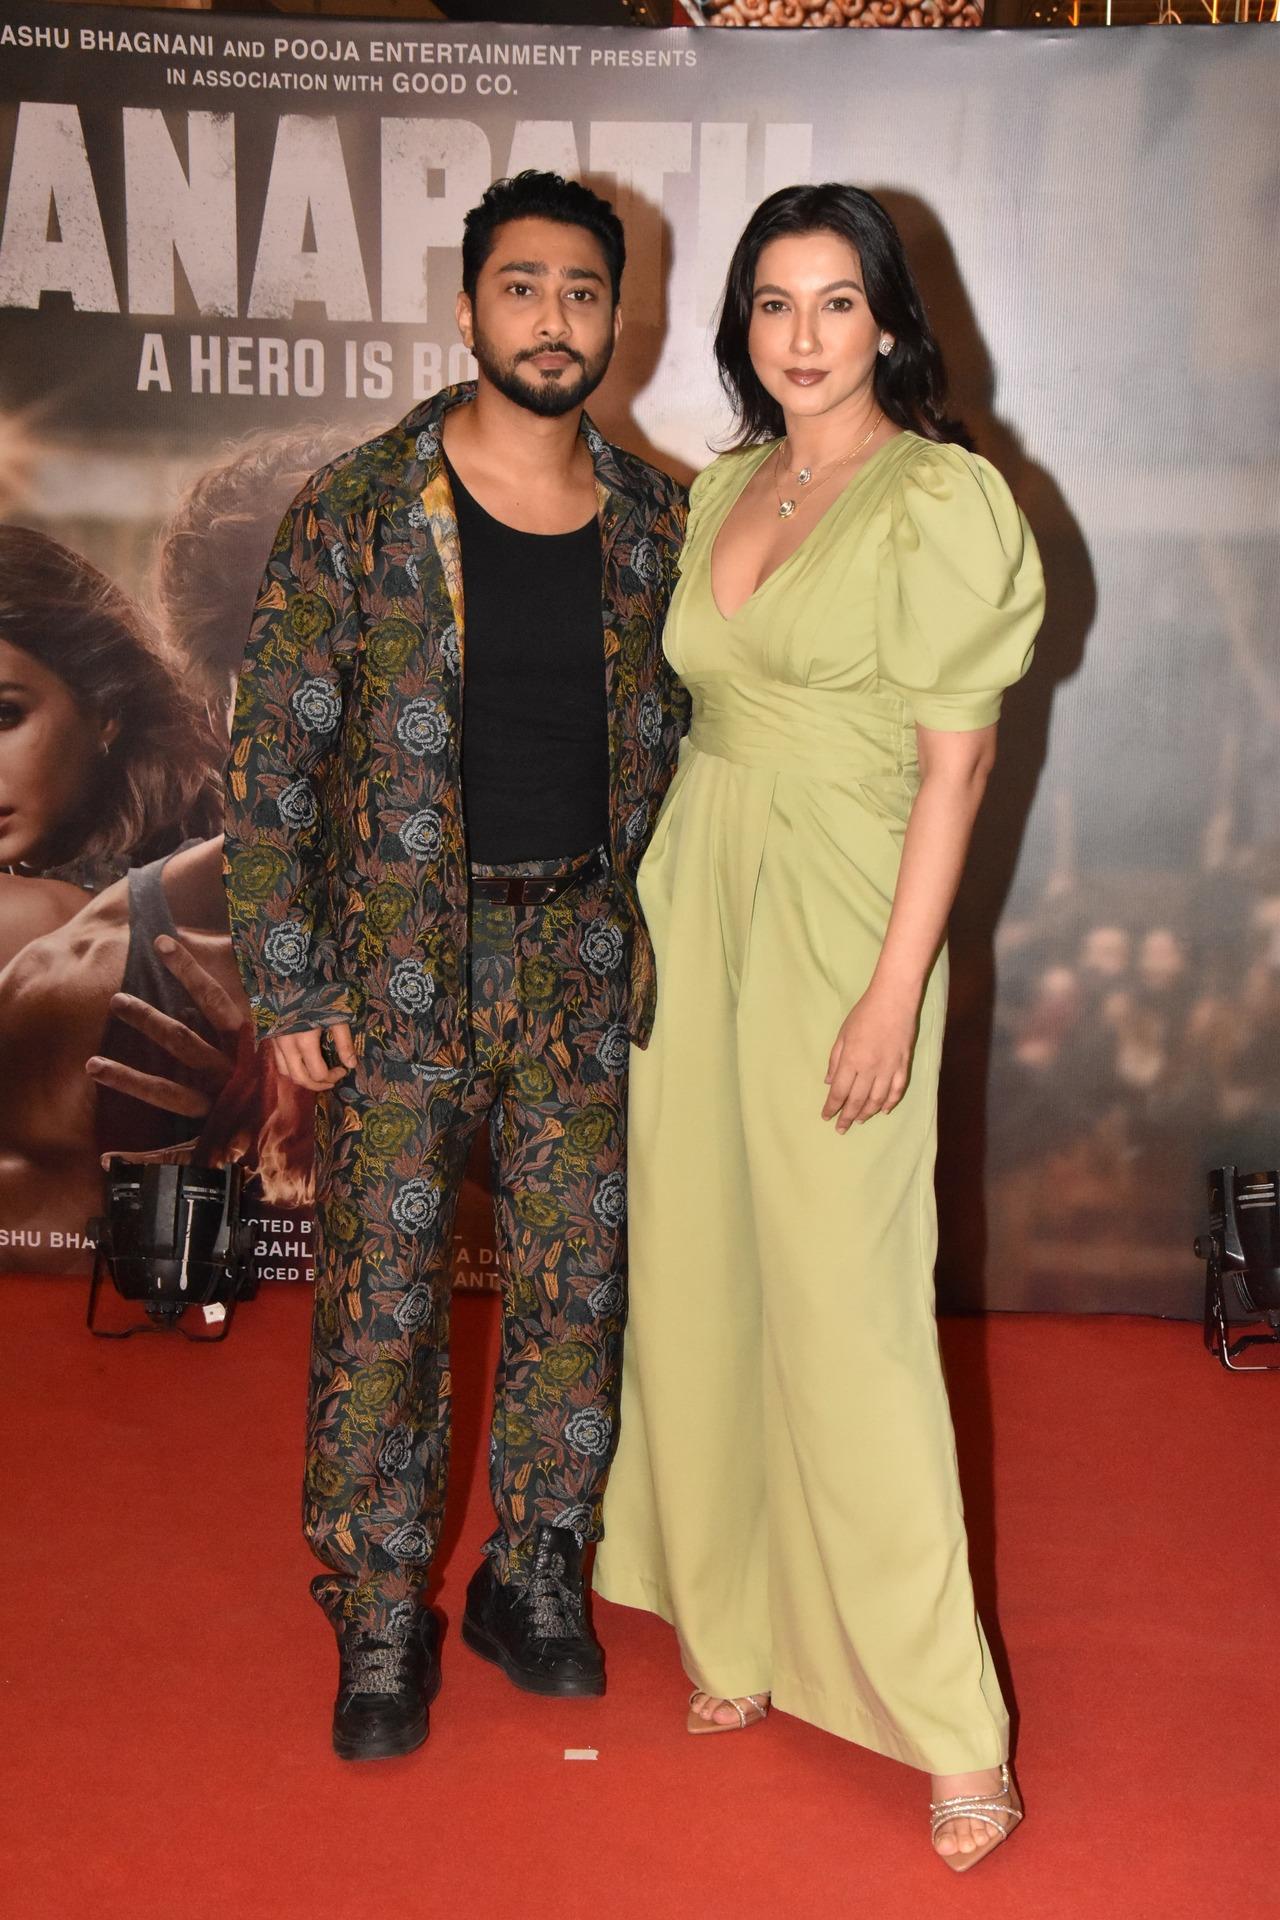 New parents in town Gauahar Khan and Zaid Darbar pose together